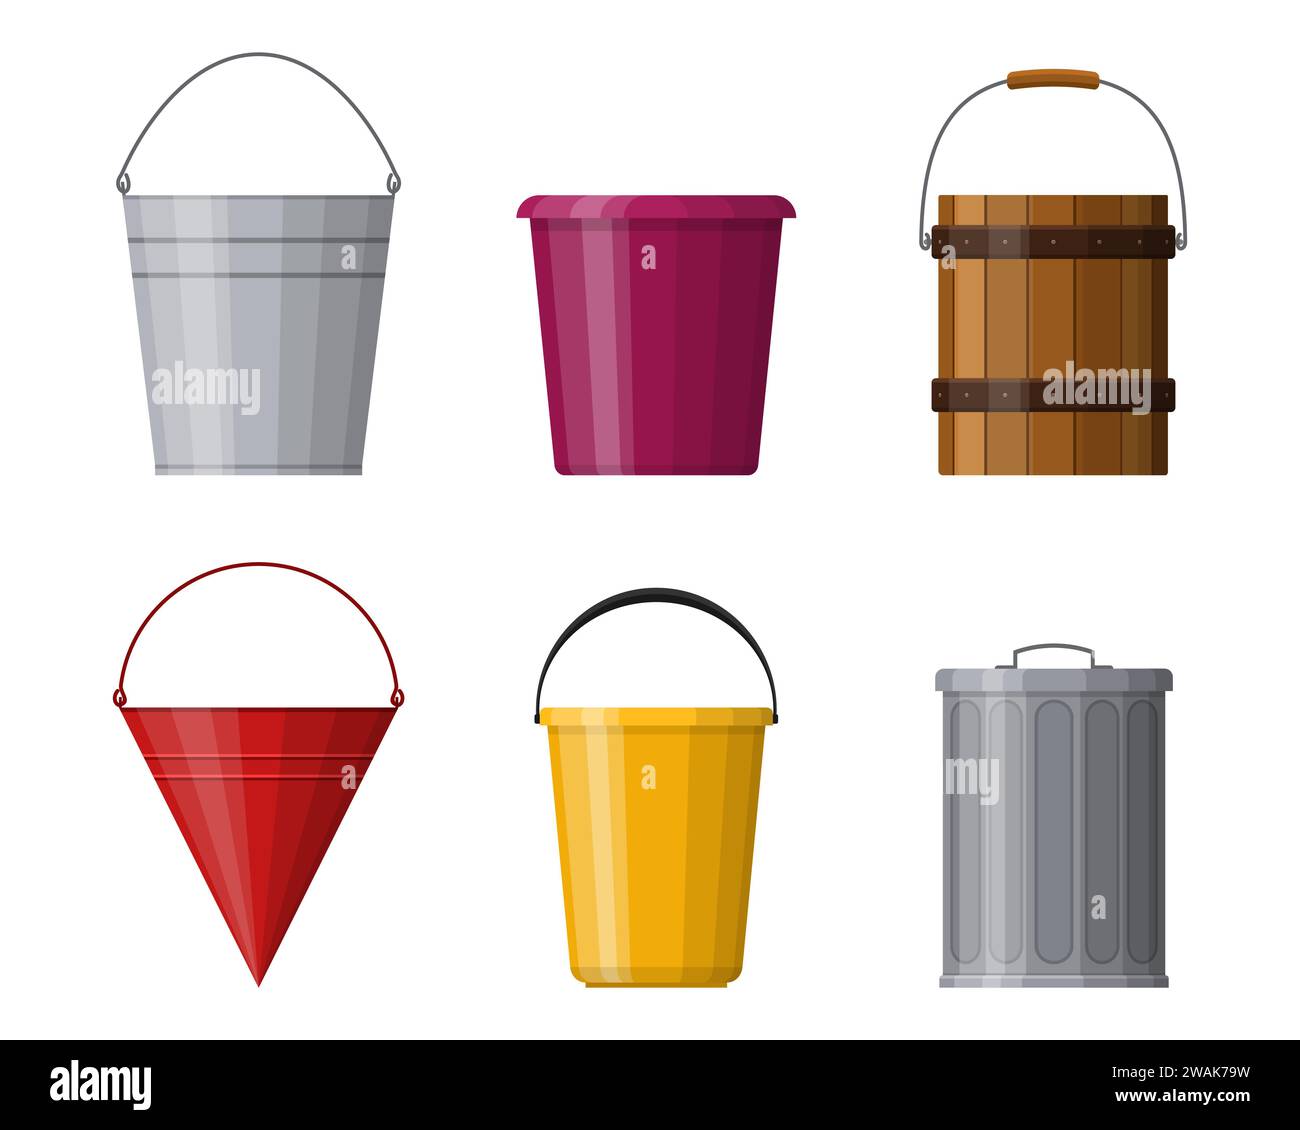 Different buckets set isolated on white background. Steel, plastic and wooden bucket set for gardening, metal container for water and handles trash bi Stock Vector